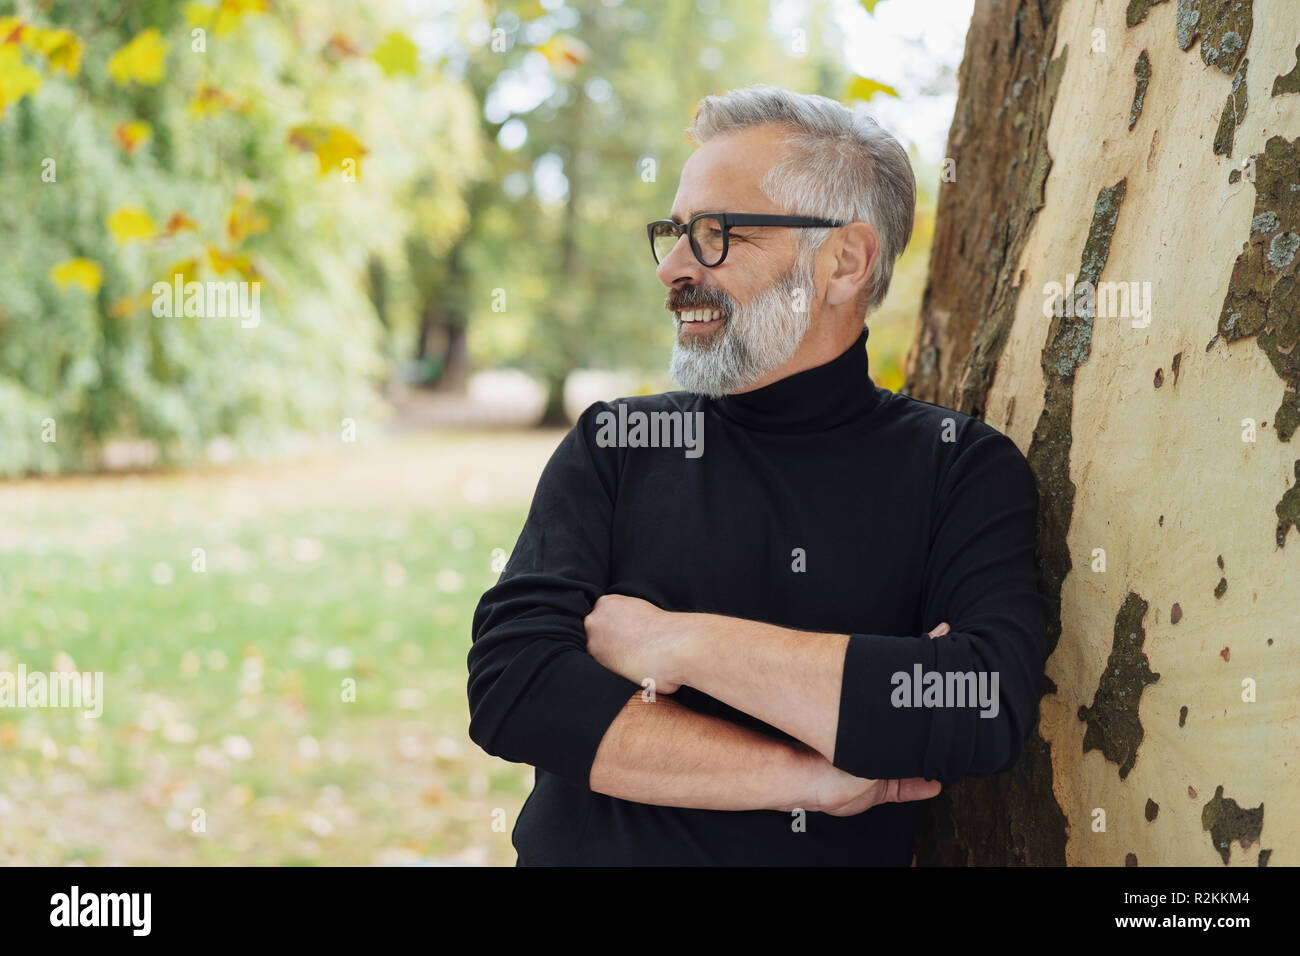 Smiling man with beard and glasses leaning against a tree trunk in an autumn park with folded arms looking to the side Stock Photo